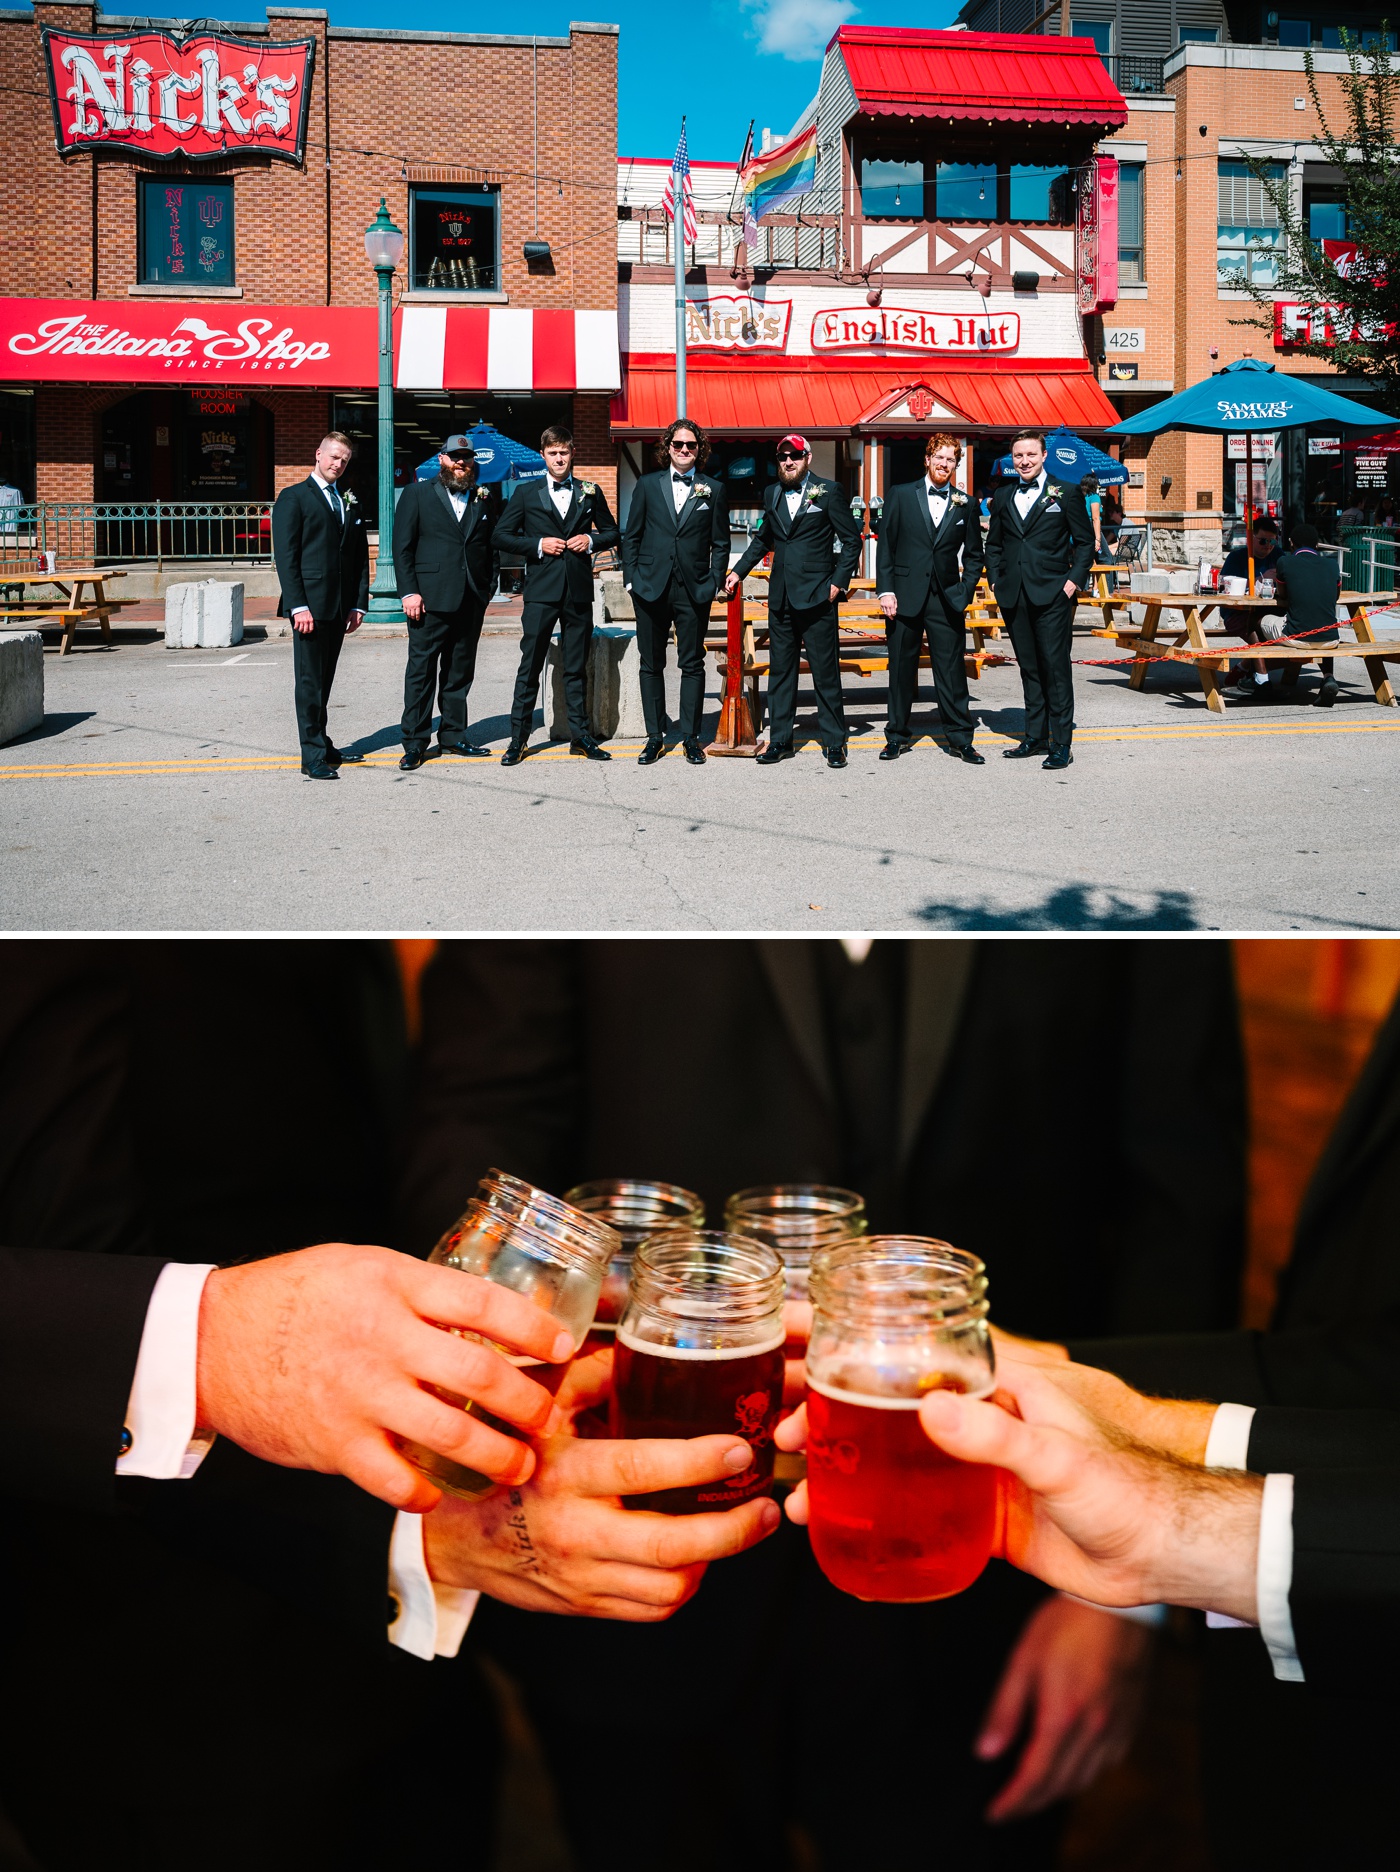 Groom and his groomsmen at Nick's English Hut in Bloomington, IN